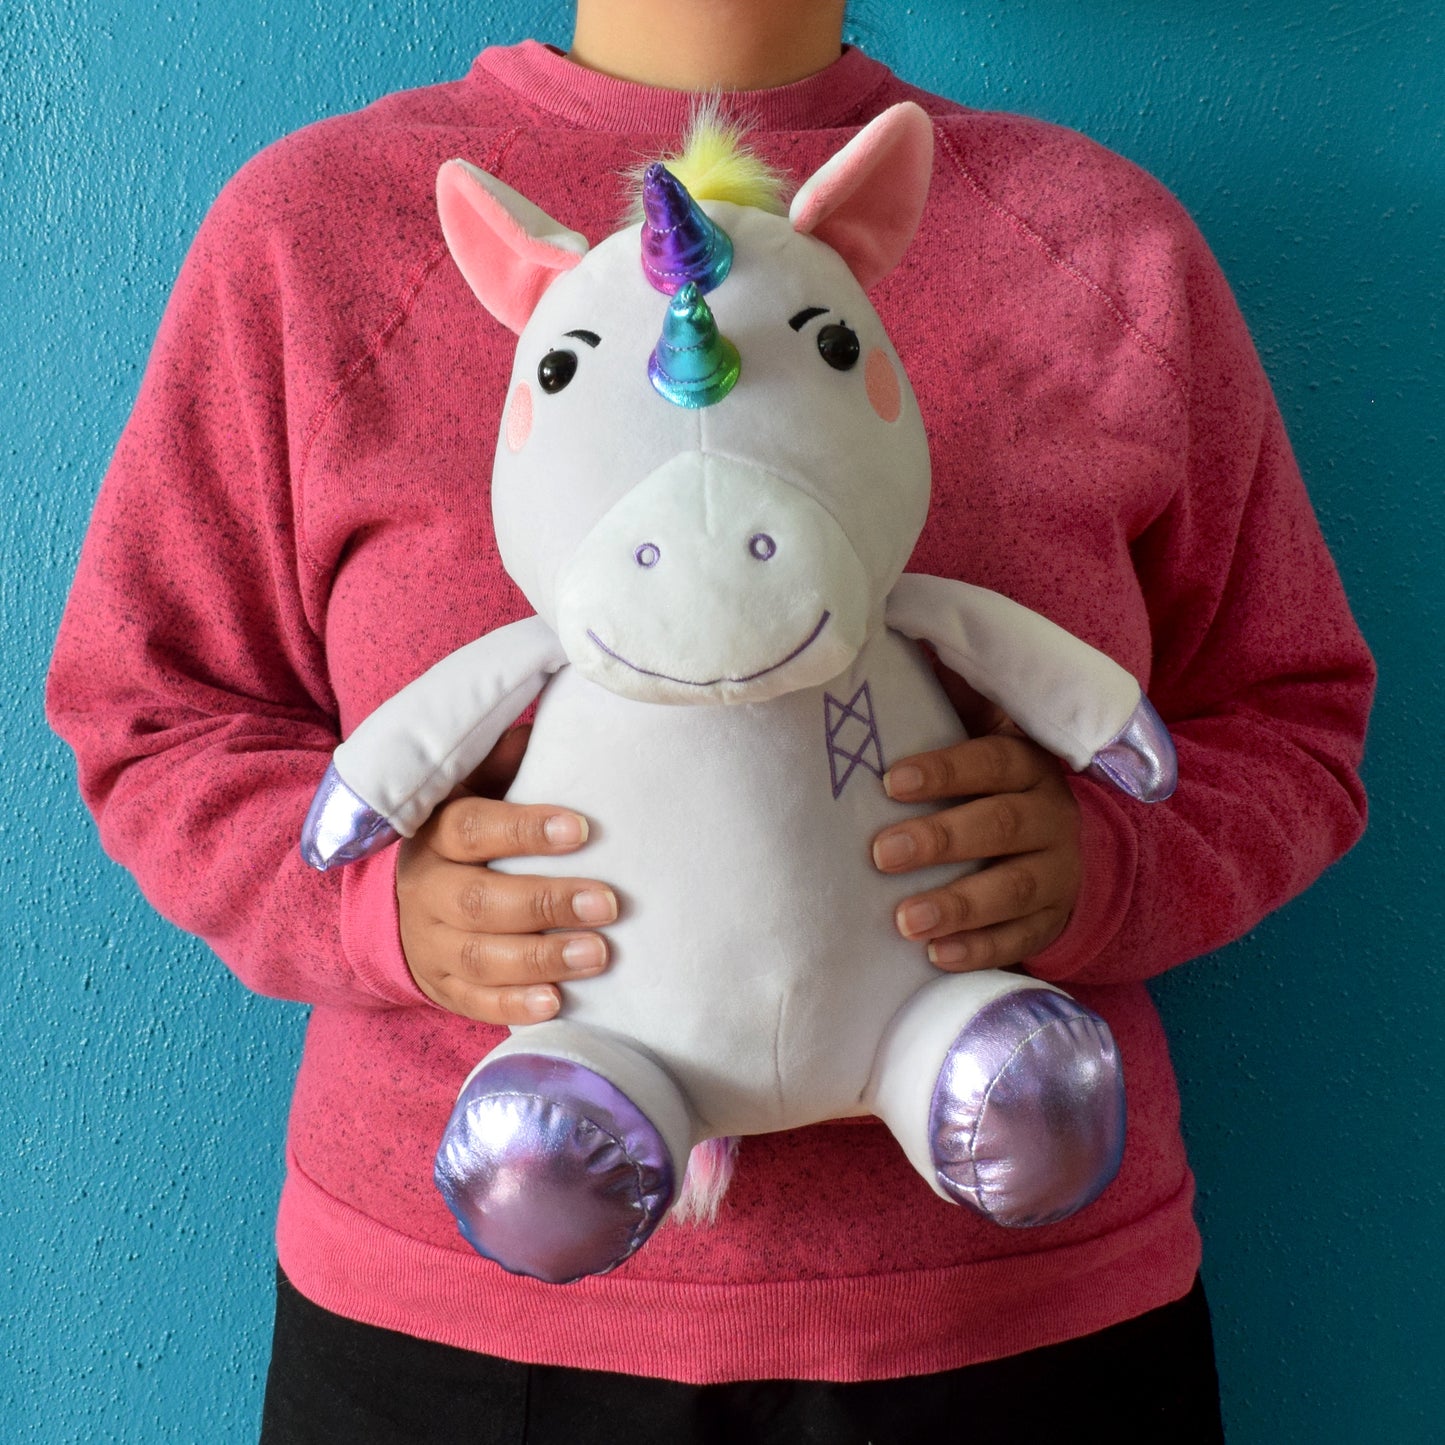 A figure wearing pink holding a stuffed animal against a blue wall. The stuffed animal is a Garyl plushie with a purple body, pink cheeks, two shiny rainbow horns, shiny purple hooves, and a bright rainbow faux fur mane and tail. 